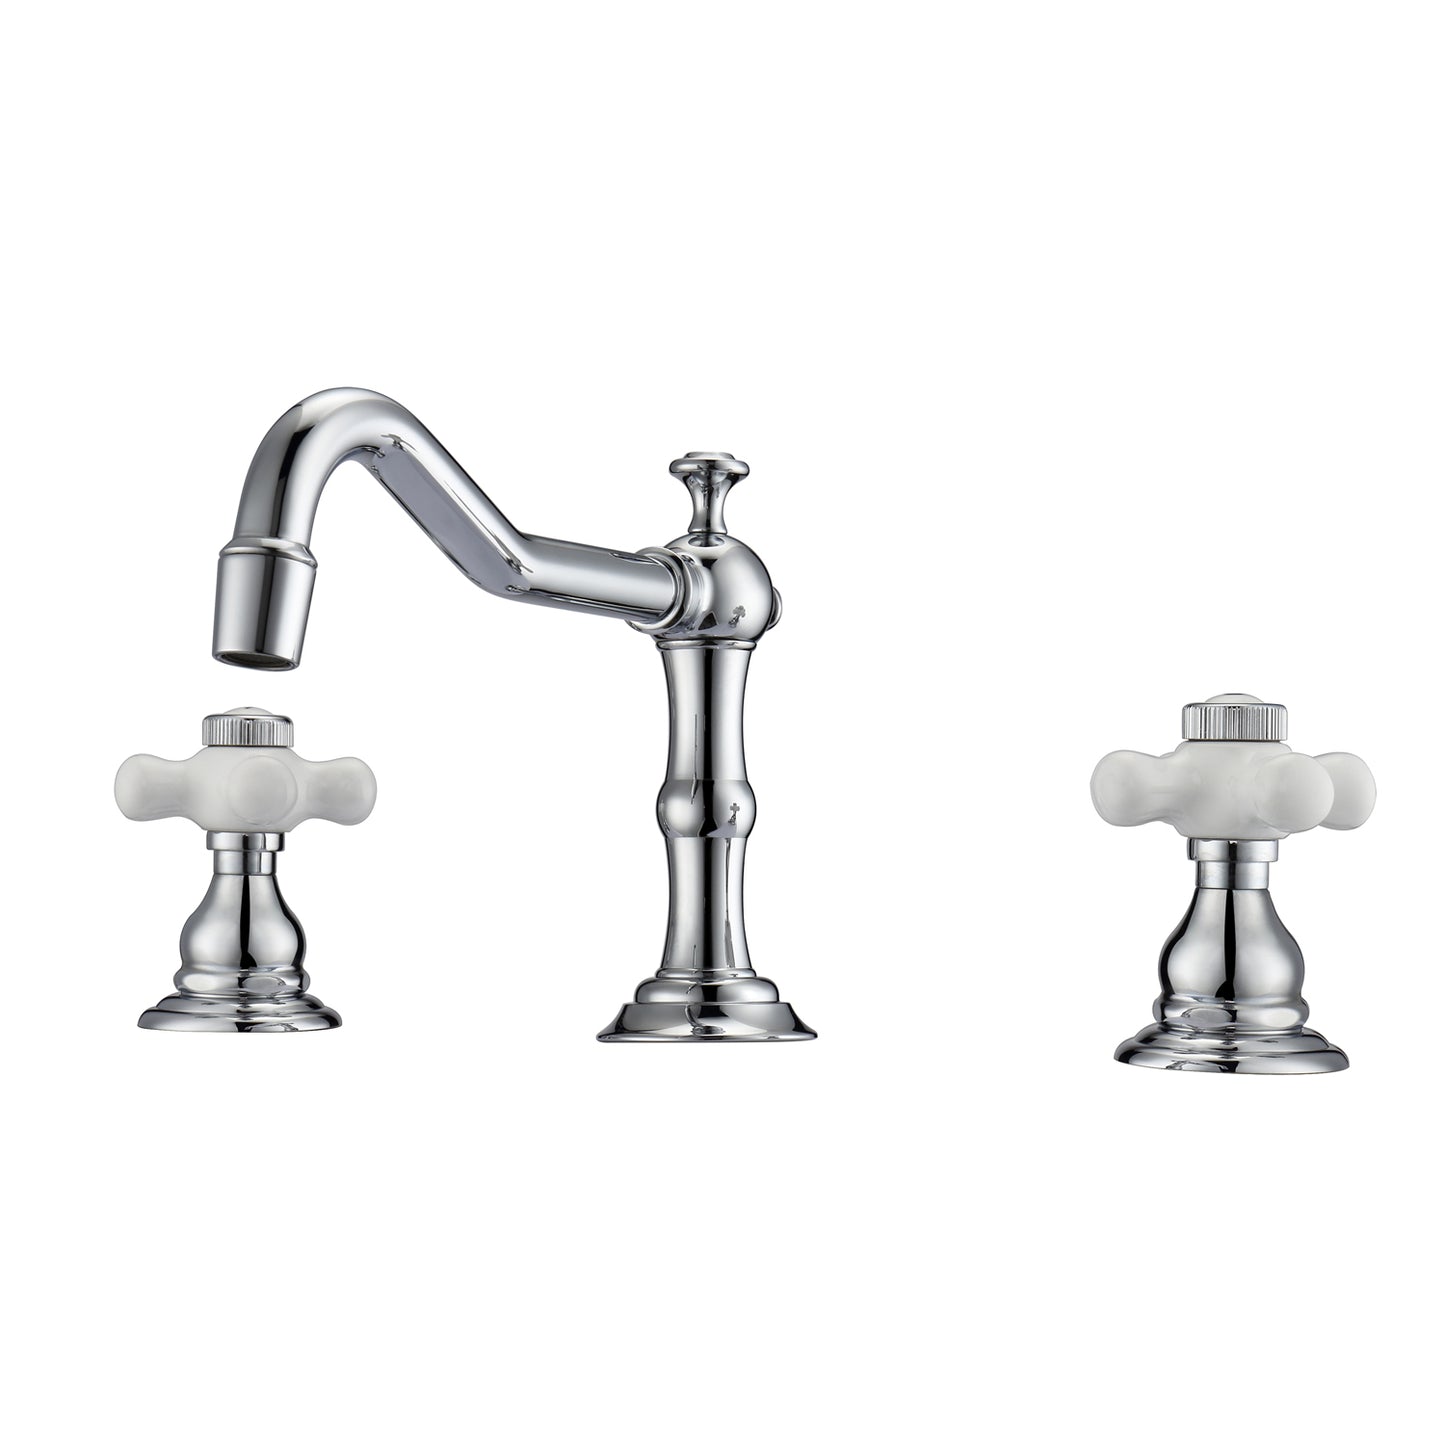 Roma 8" Widespread Chrome Bathroom Faucet with Porcelain Cross Handles